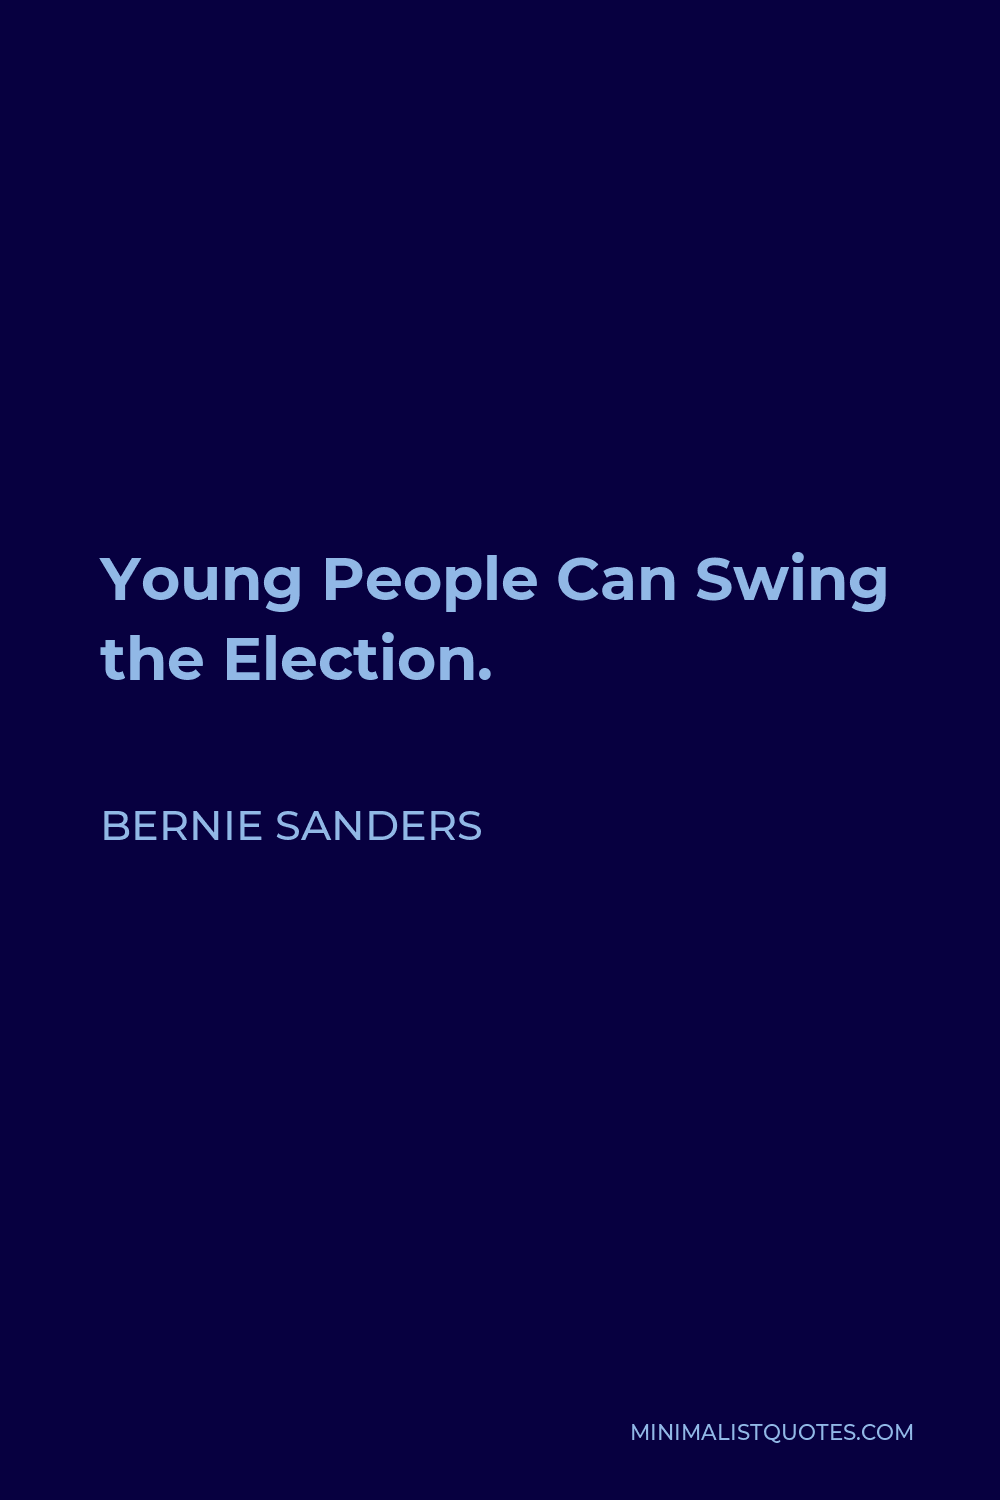 Bernie Sanders Quote - Young People Can Swing the Election.